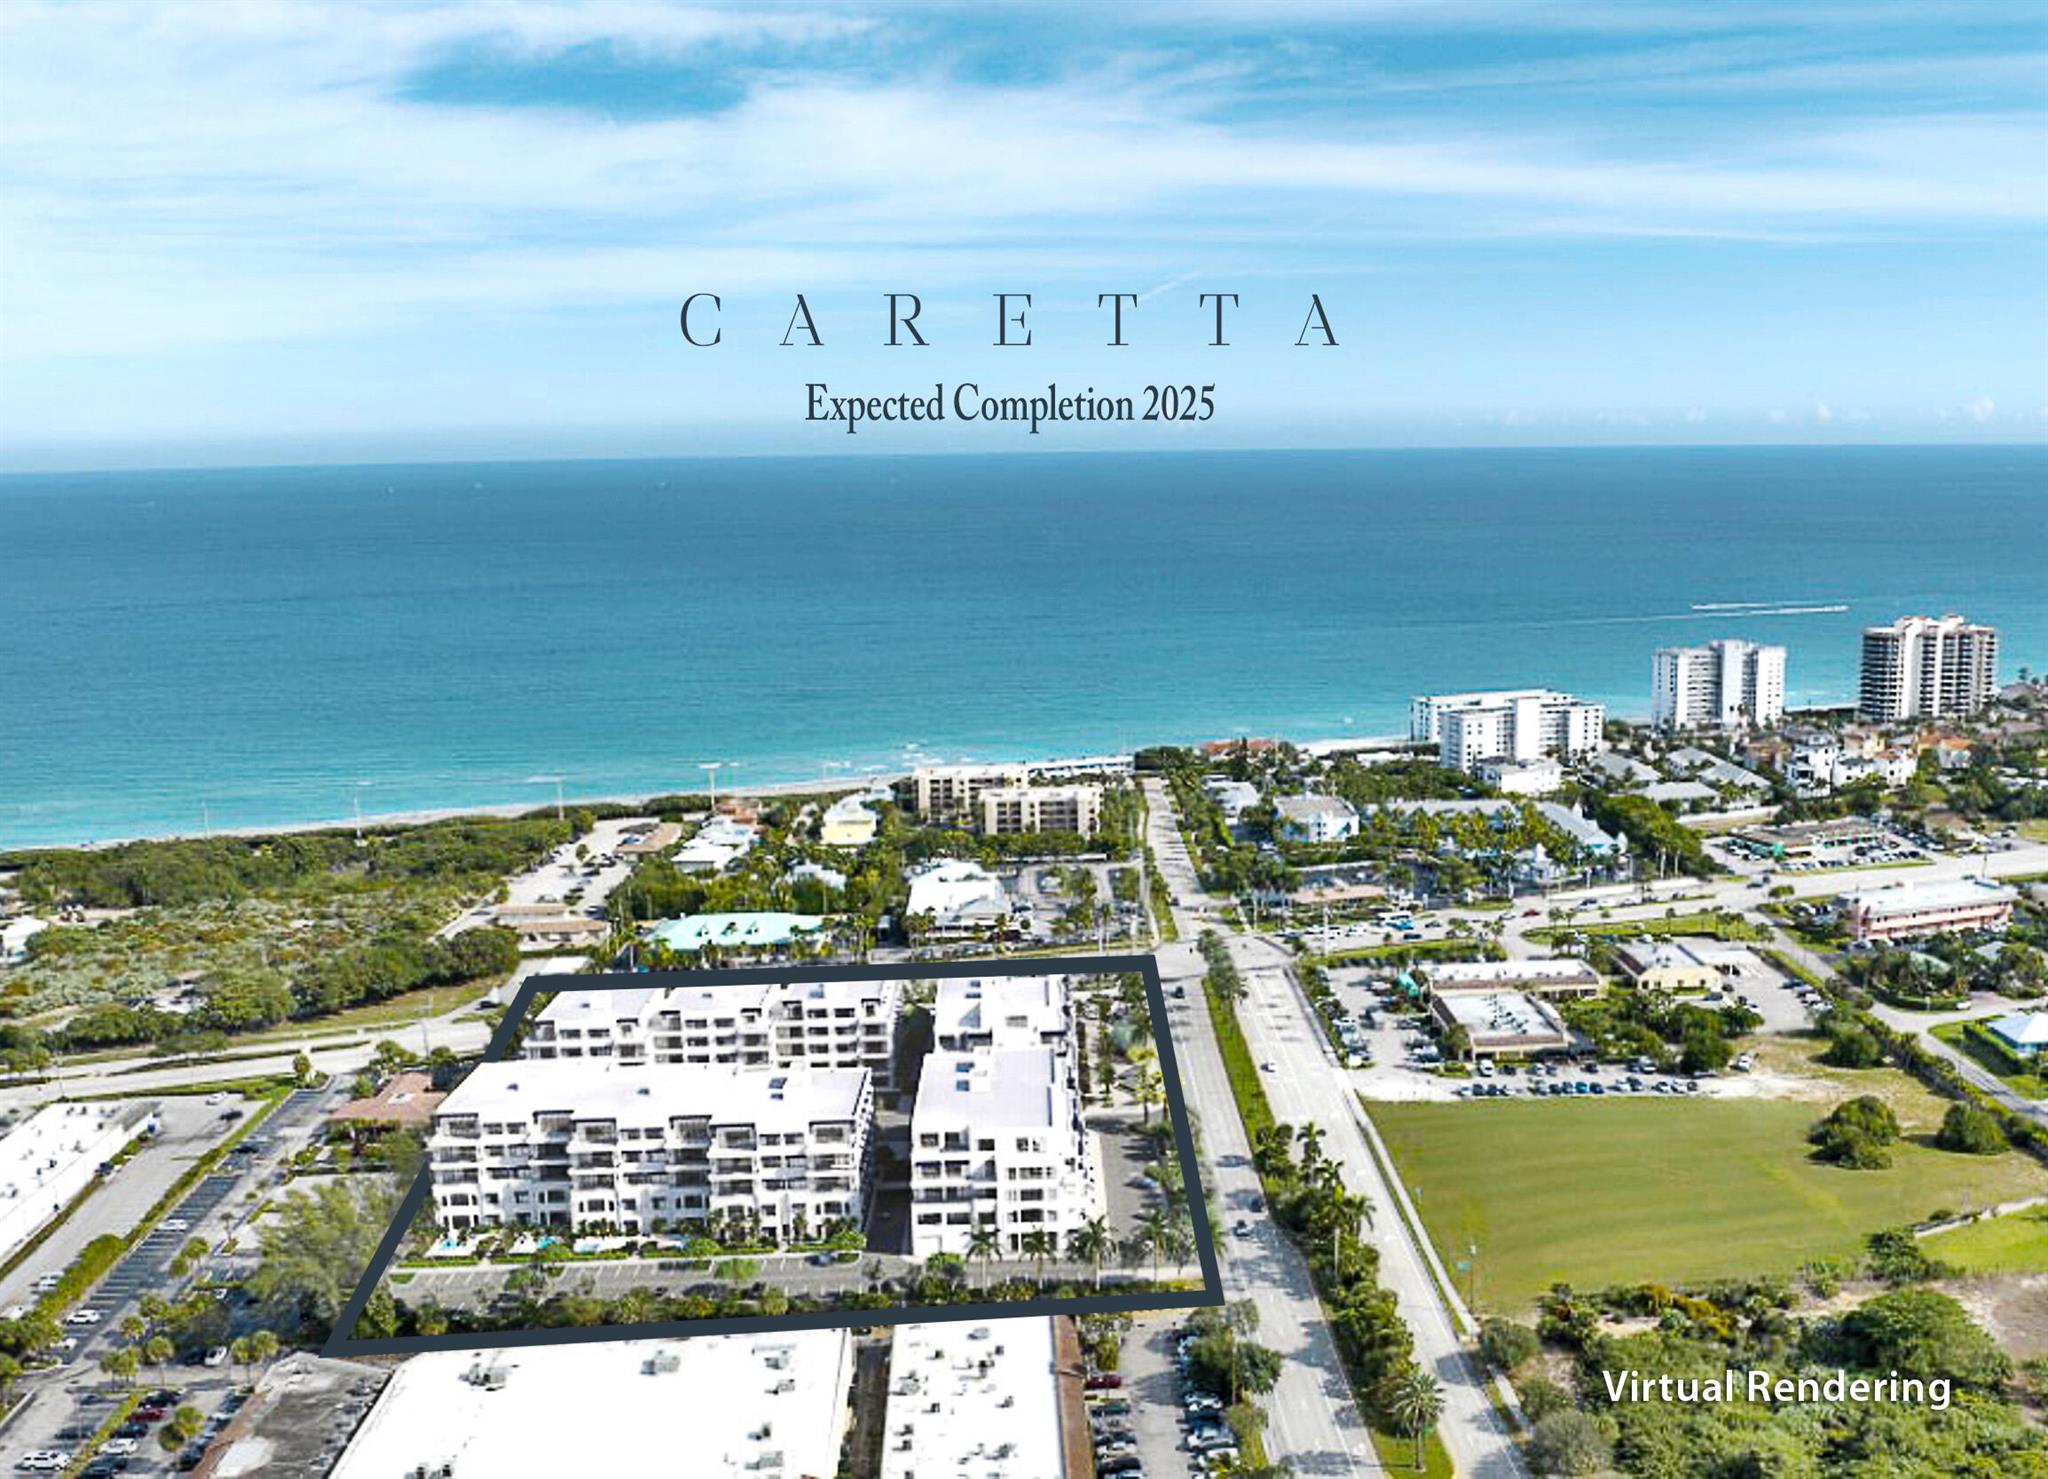 Juno Beach's newest seaside community, Caretta! Enjoy sunrise views from your oversized, east facing terrace. The terrace features a covered outdoor kitchen with a built-in gas grill. Inside, the unit offers all the modern luxuries including a chef's kitchen featuring wolf cooking appliances, sub-zero refrigeration and a spacious island with waterfall countertops, elegant features, and 10' ceilings.  Caretta is Juno's newest luxury development with amenities including a rooftop pool, sauna, dog park, fitness center, golf simulation, and restaurant. Just 400 yards to the beach. Since 1993, JDL Development has earned a reputation for developing luxury developments that exceed expectations, resulting in some of Chicago's most significant developments including One Chicago and No. 9 Walton